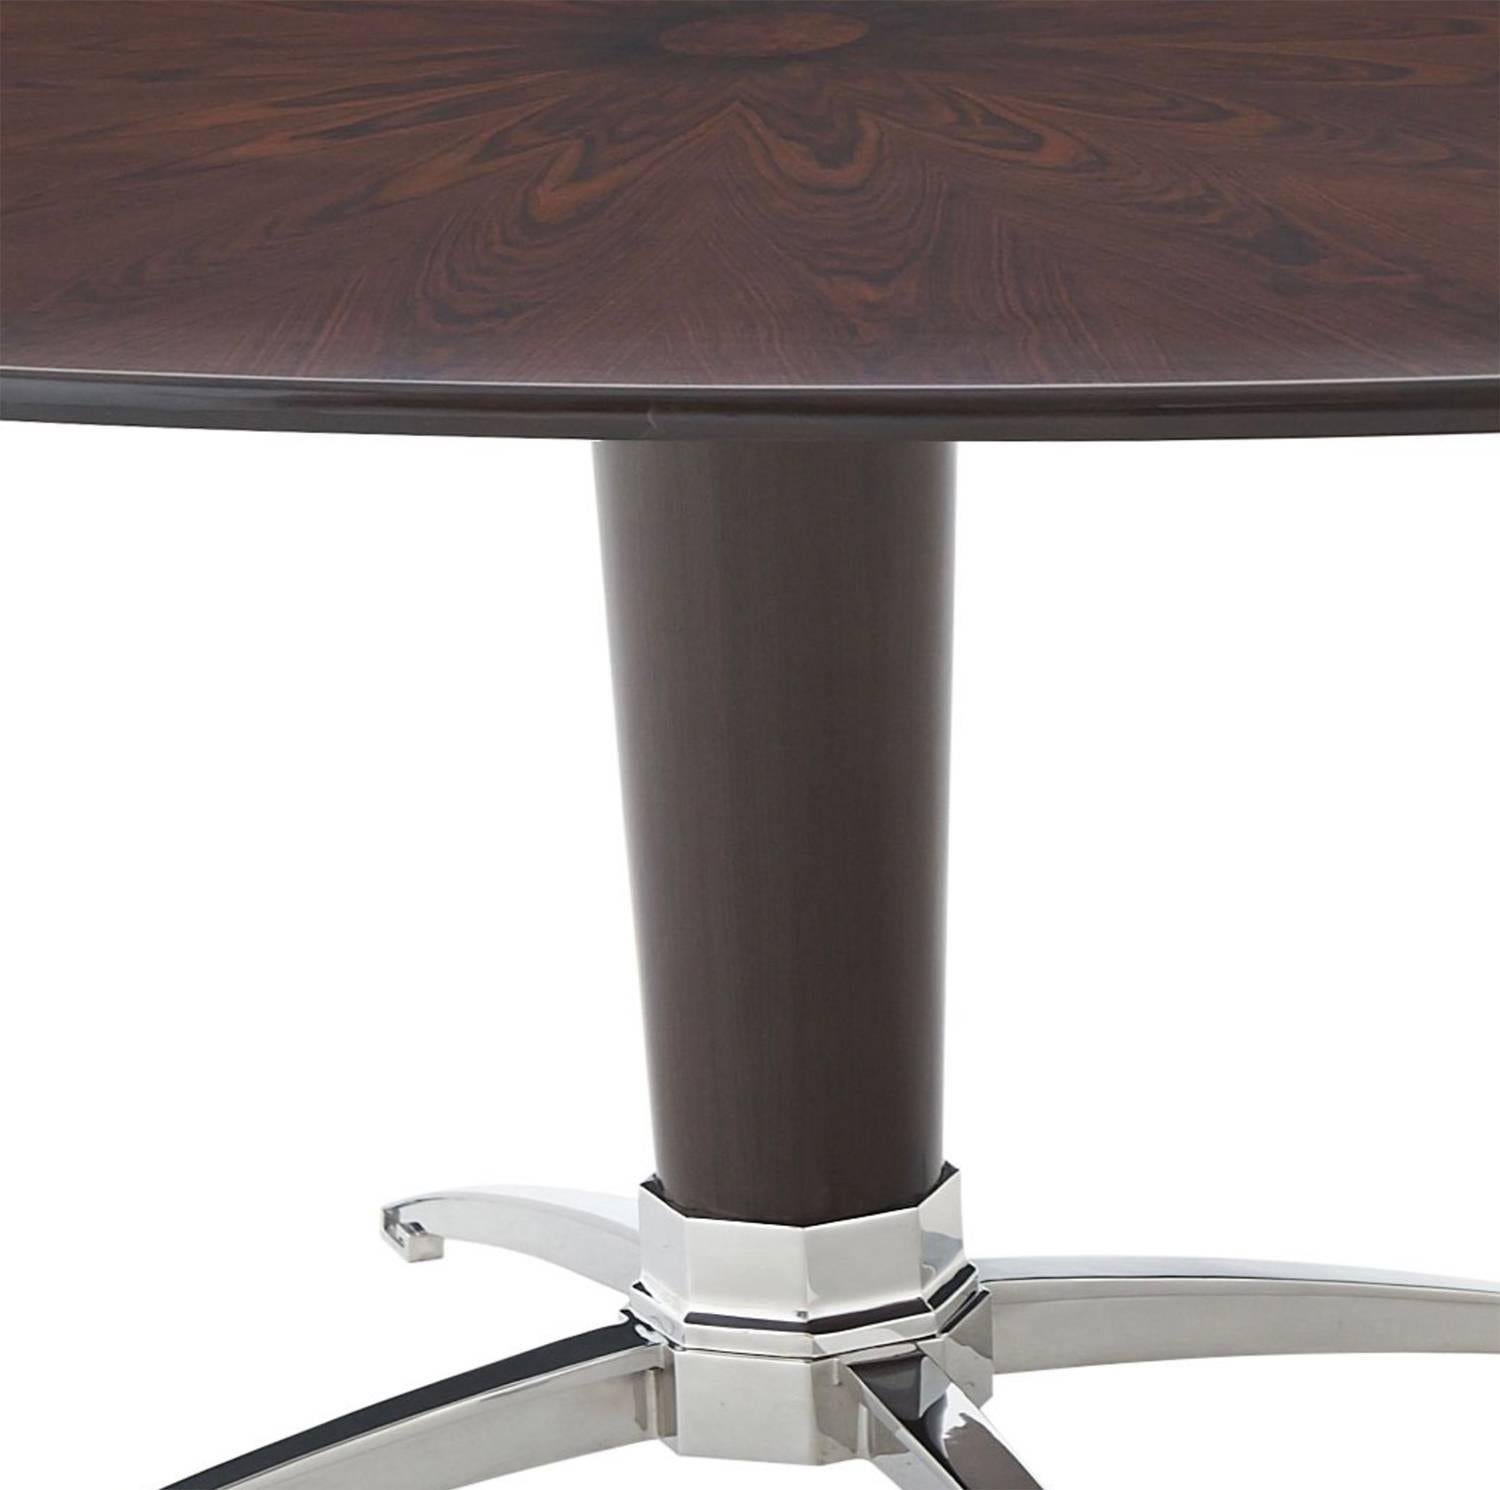 Large midcentury oval dining table with stainless steel pedestal base.

